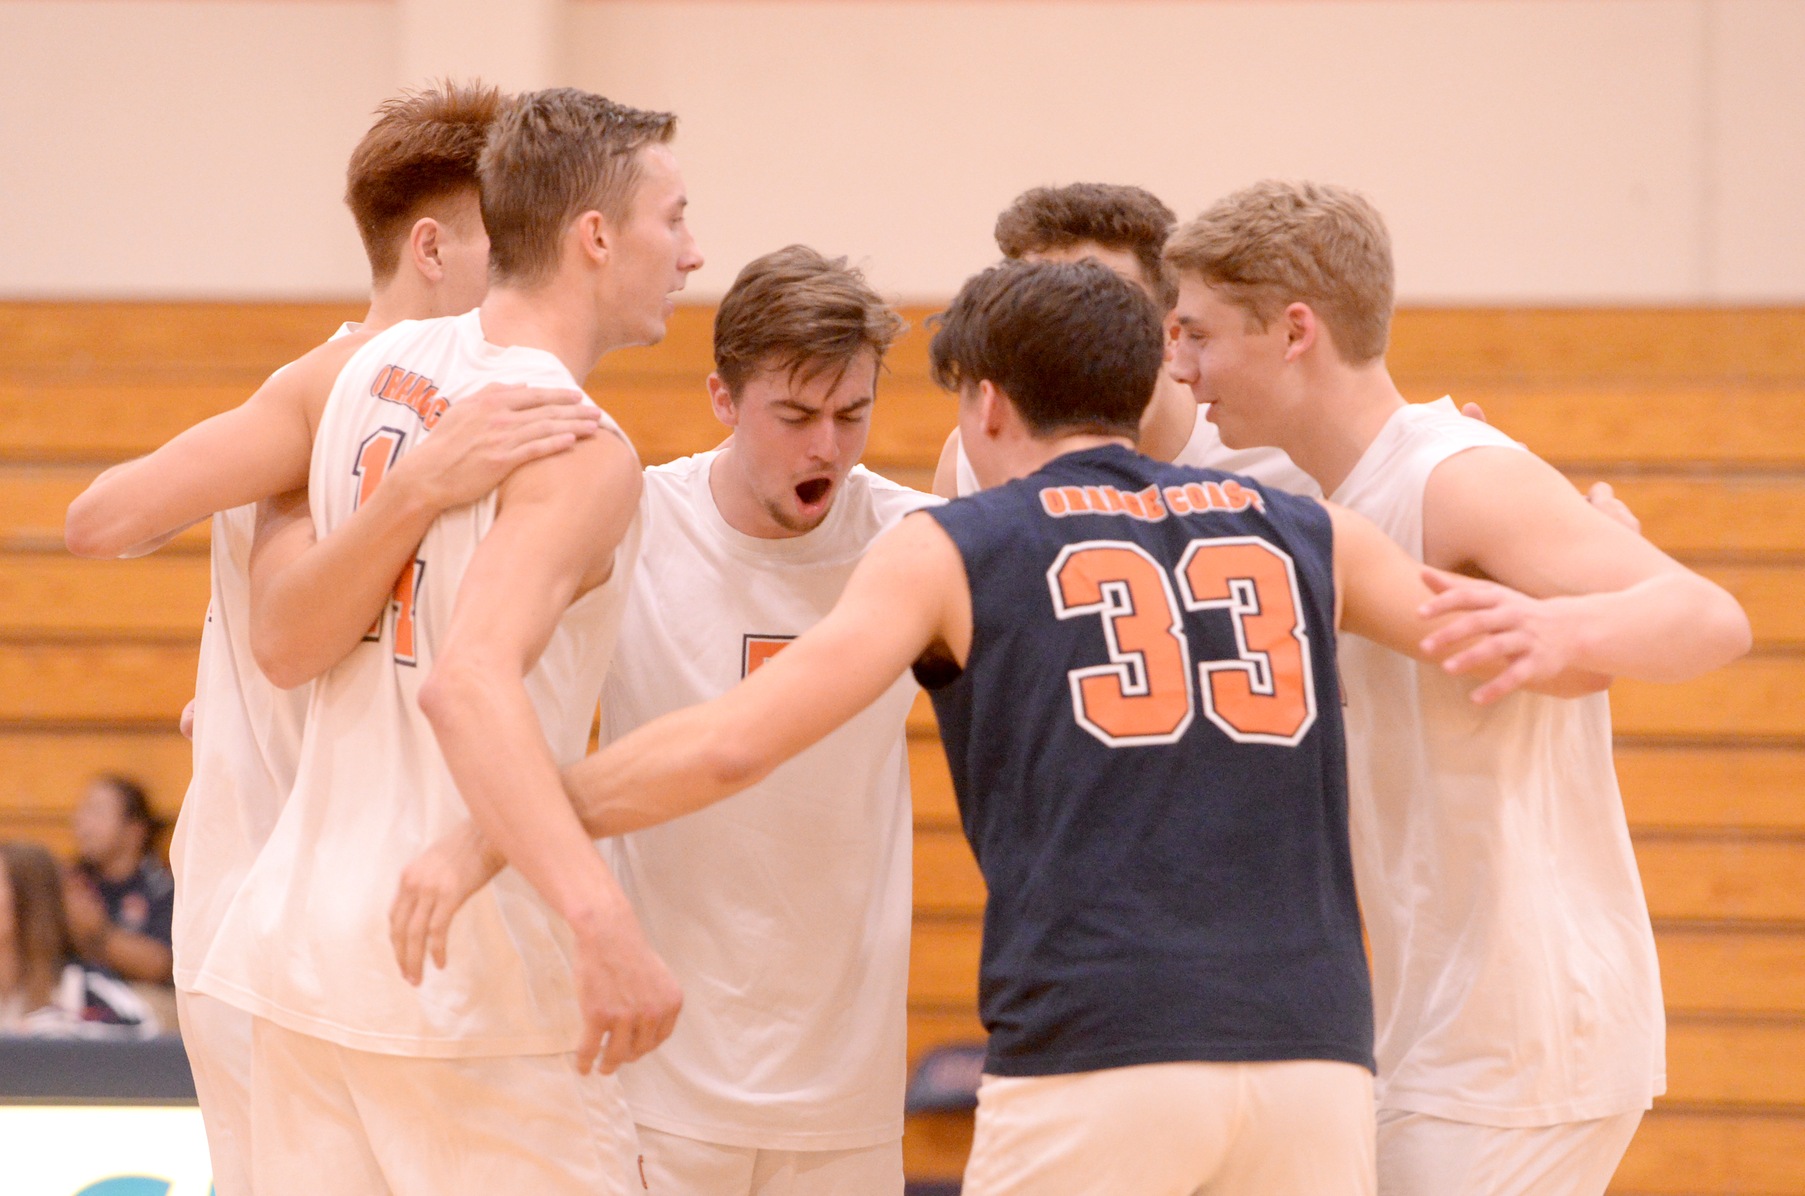 Pirates take on rival Lasers in Men's Volleyball State Semifinals